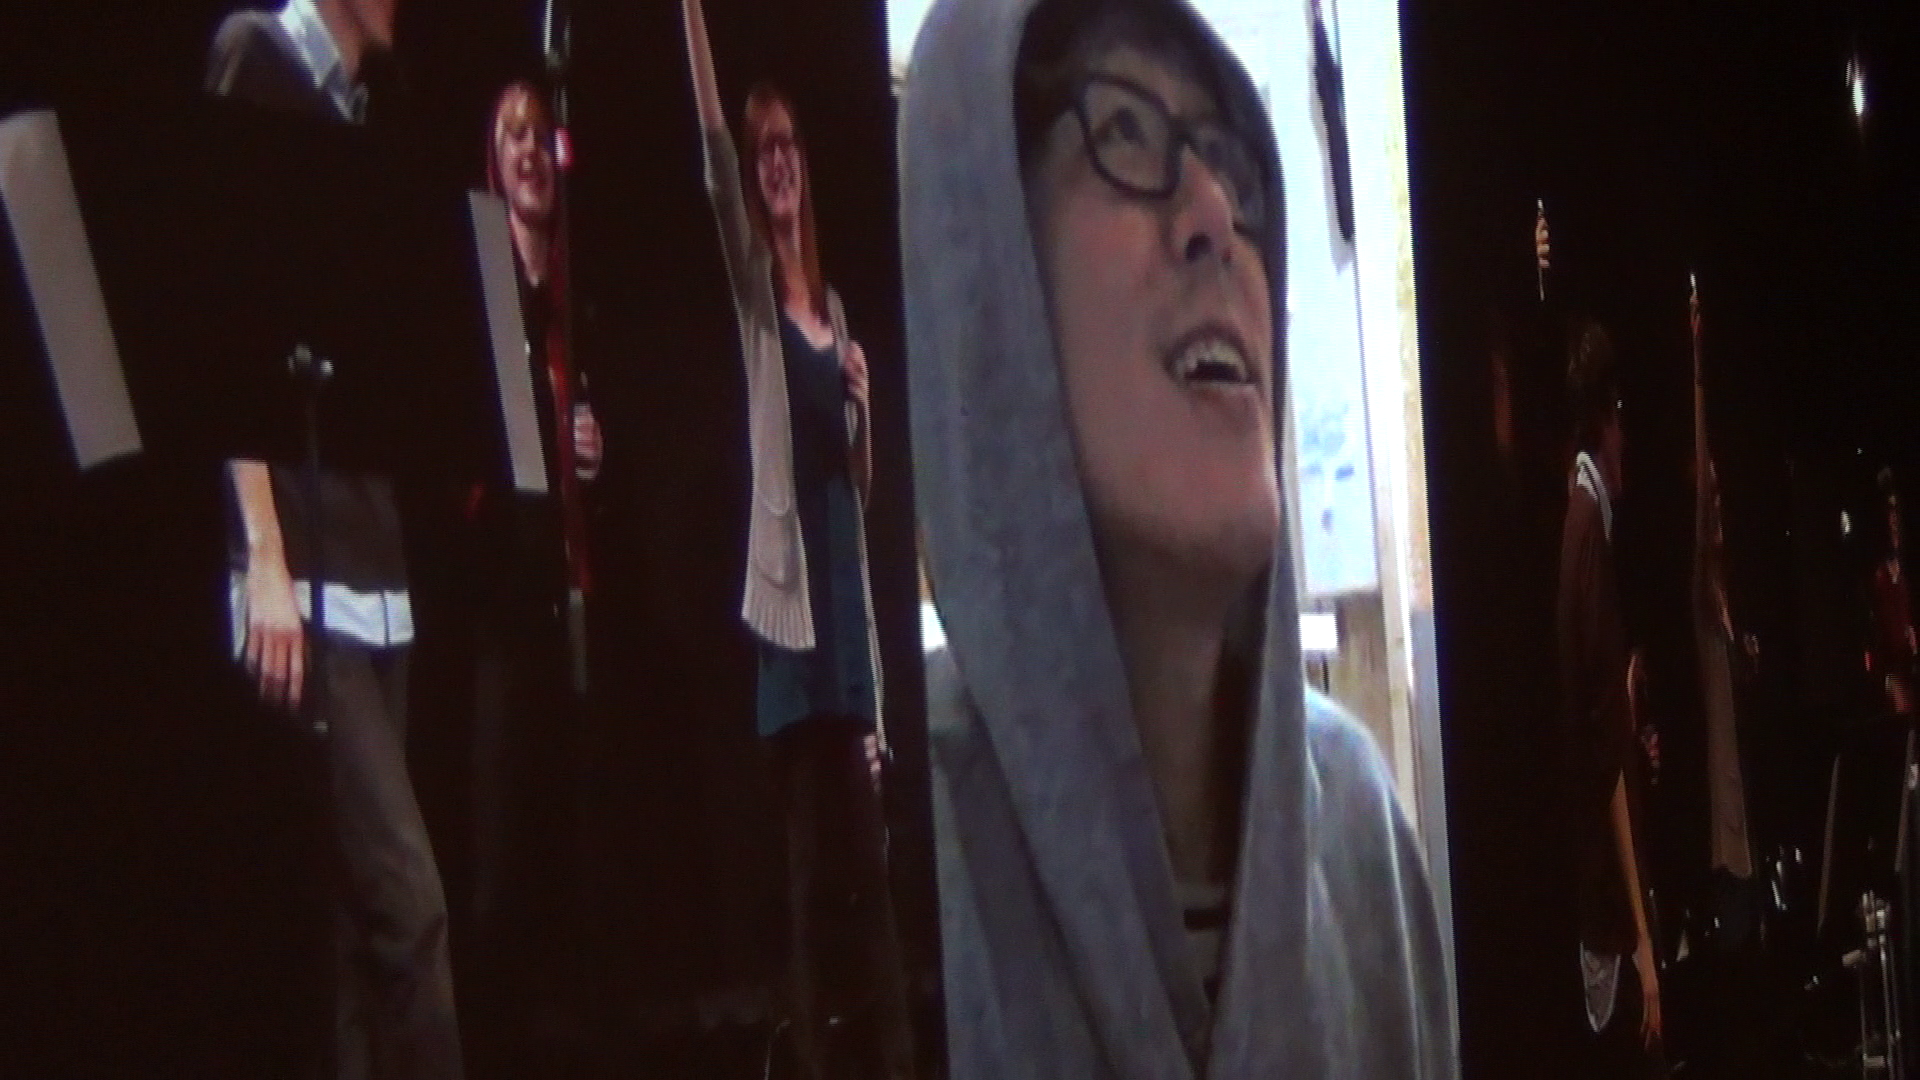 Still from Tele-Propinquity Party, held at CultureHub in New York, inviting people to connect from remote locations (February 2012)